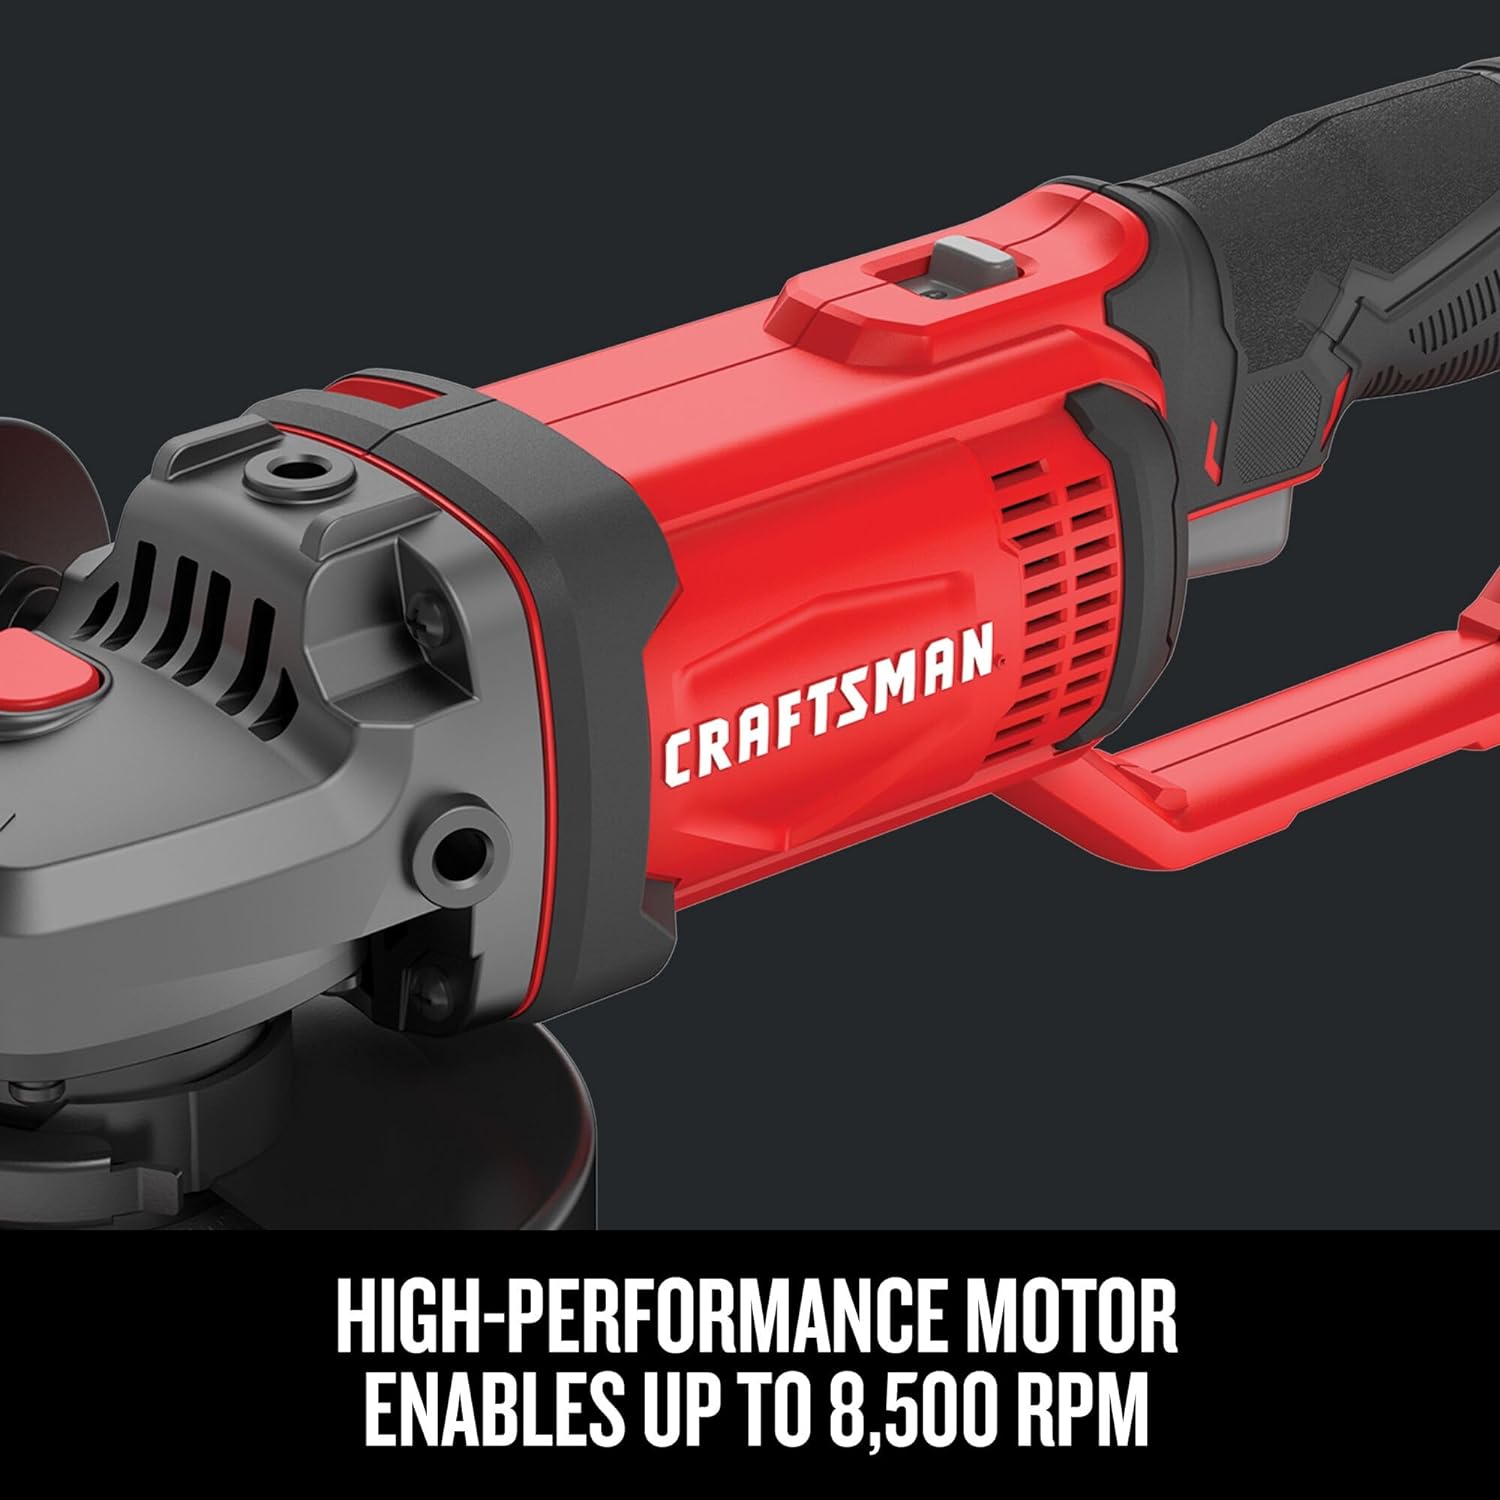 CRAFTSMAN V20* Angle Grinder, Small, 4-1/2-Inch, Tool Only (CMCG400B)